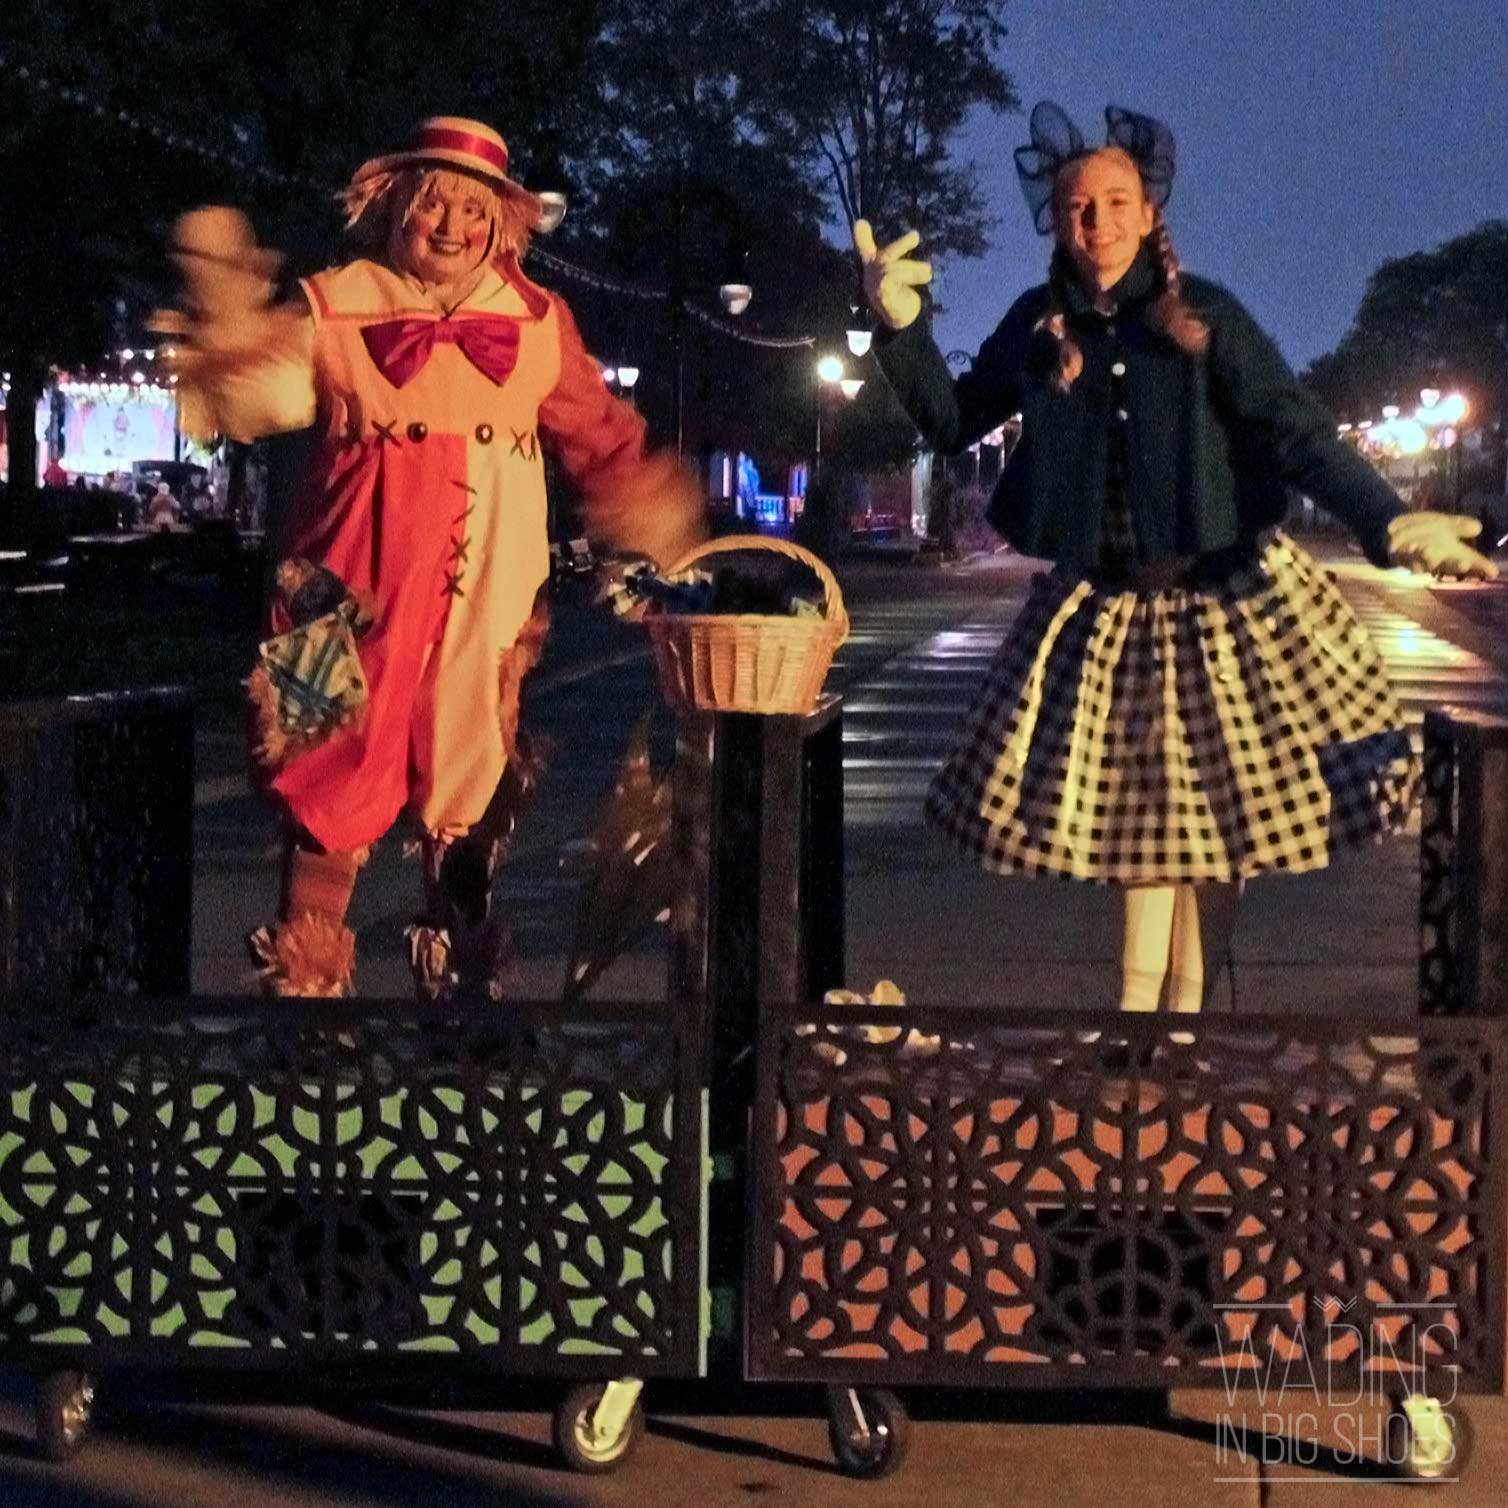 Hallowe'en in Greenfield Village: Tips To Make The Most Of Your Visit | via Wading in Big Shoes